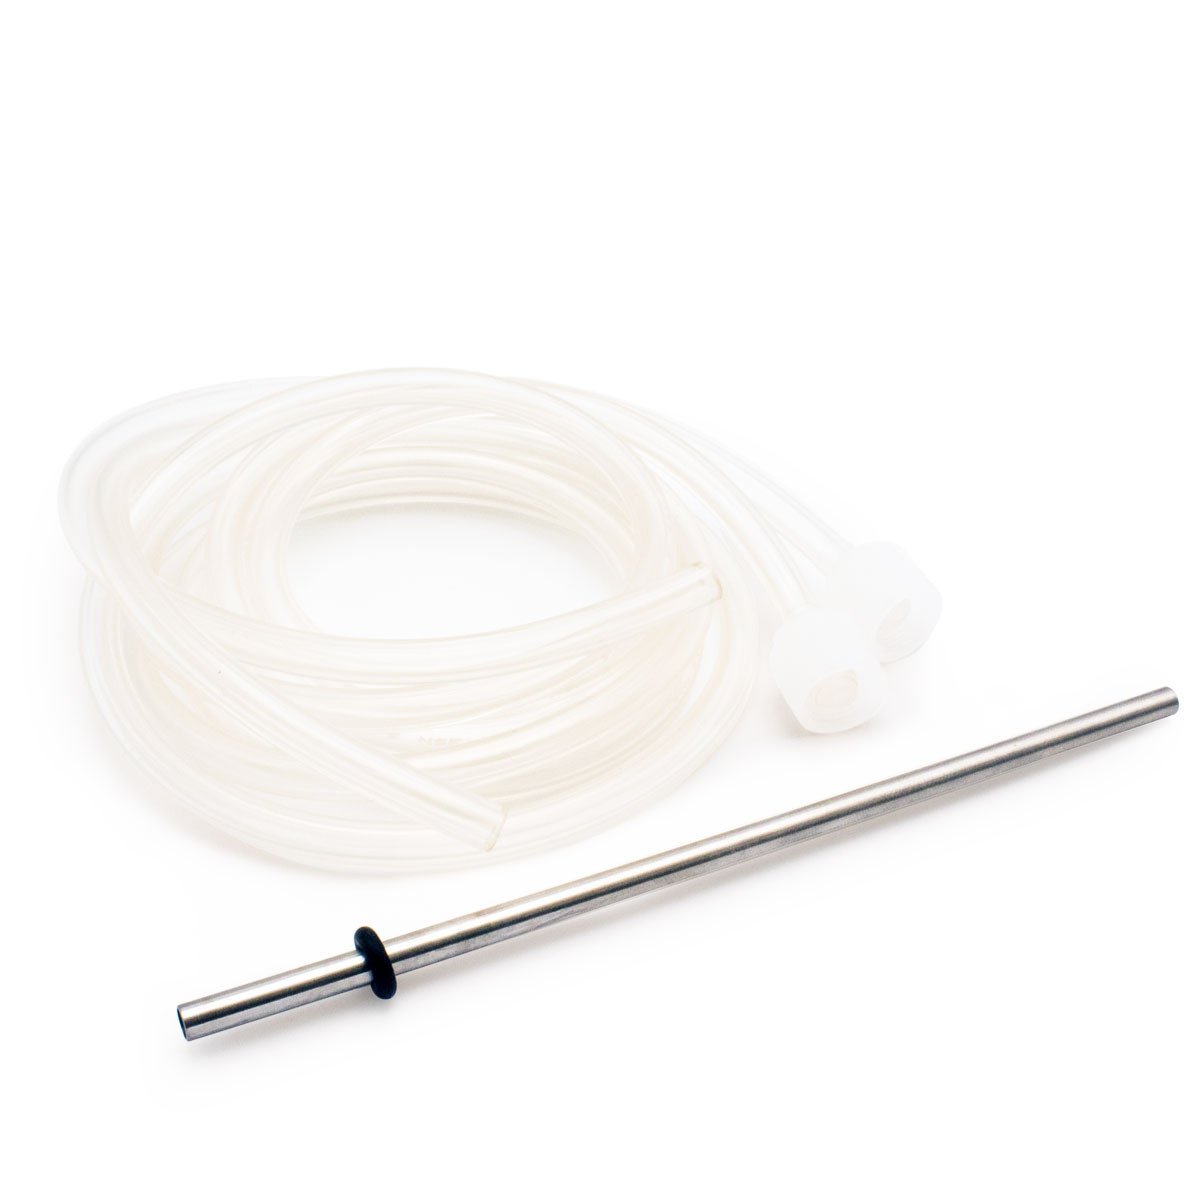 Peristaltic Pump Complete Tubing Set with SS Aspiration Tube for HI921 ...